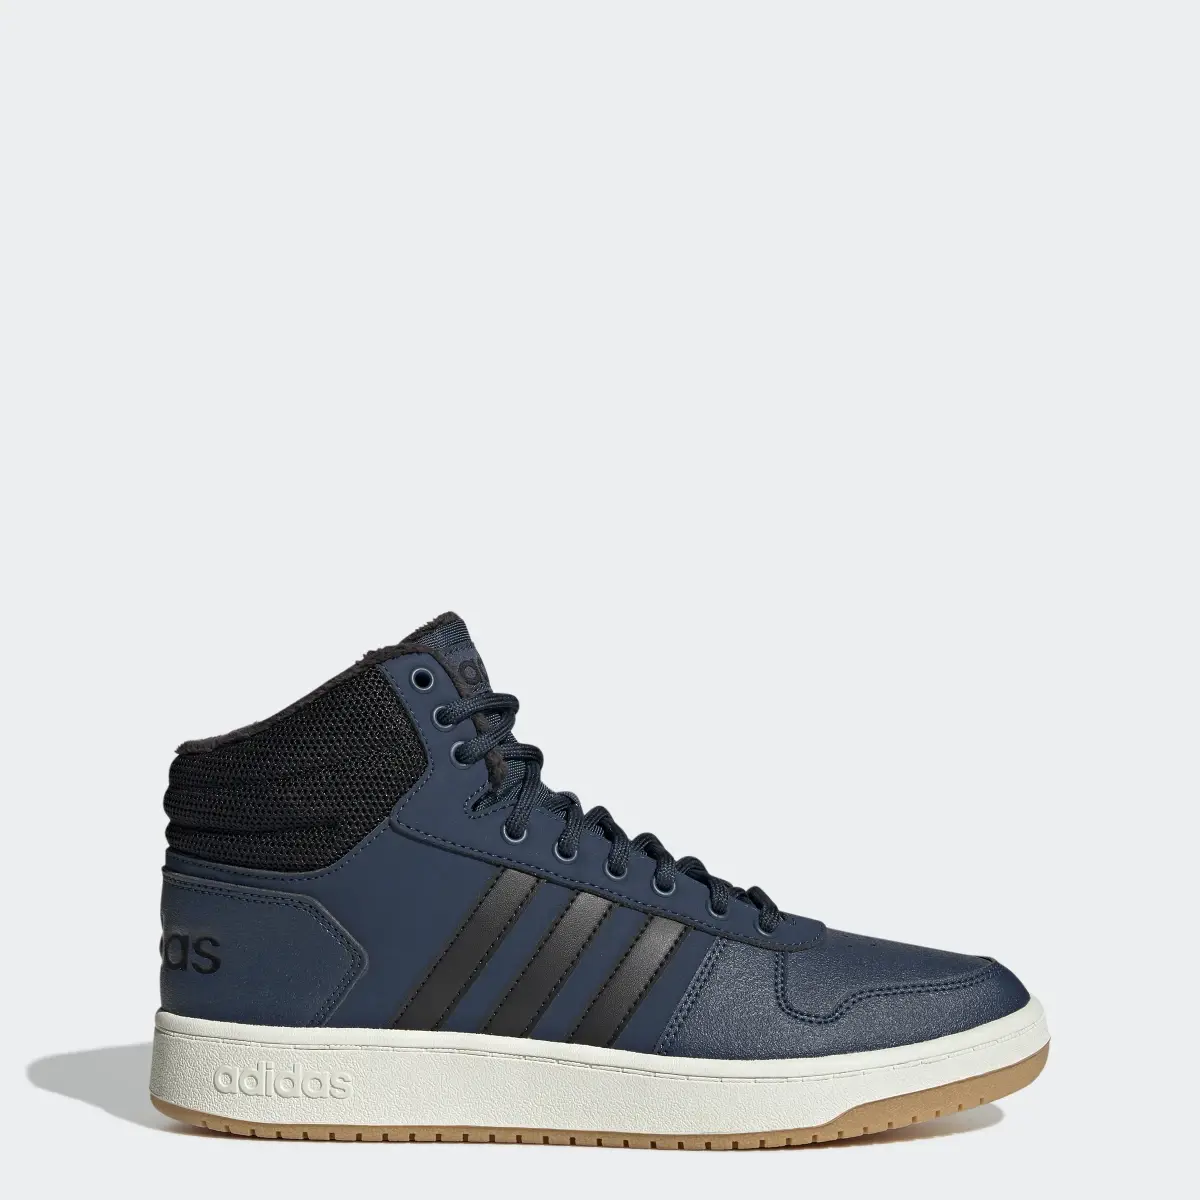 Adidas Chaussure Hoops 2.0 Mid. 1